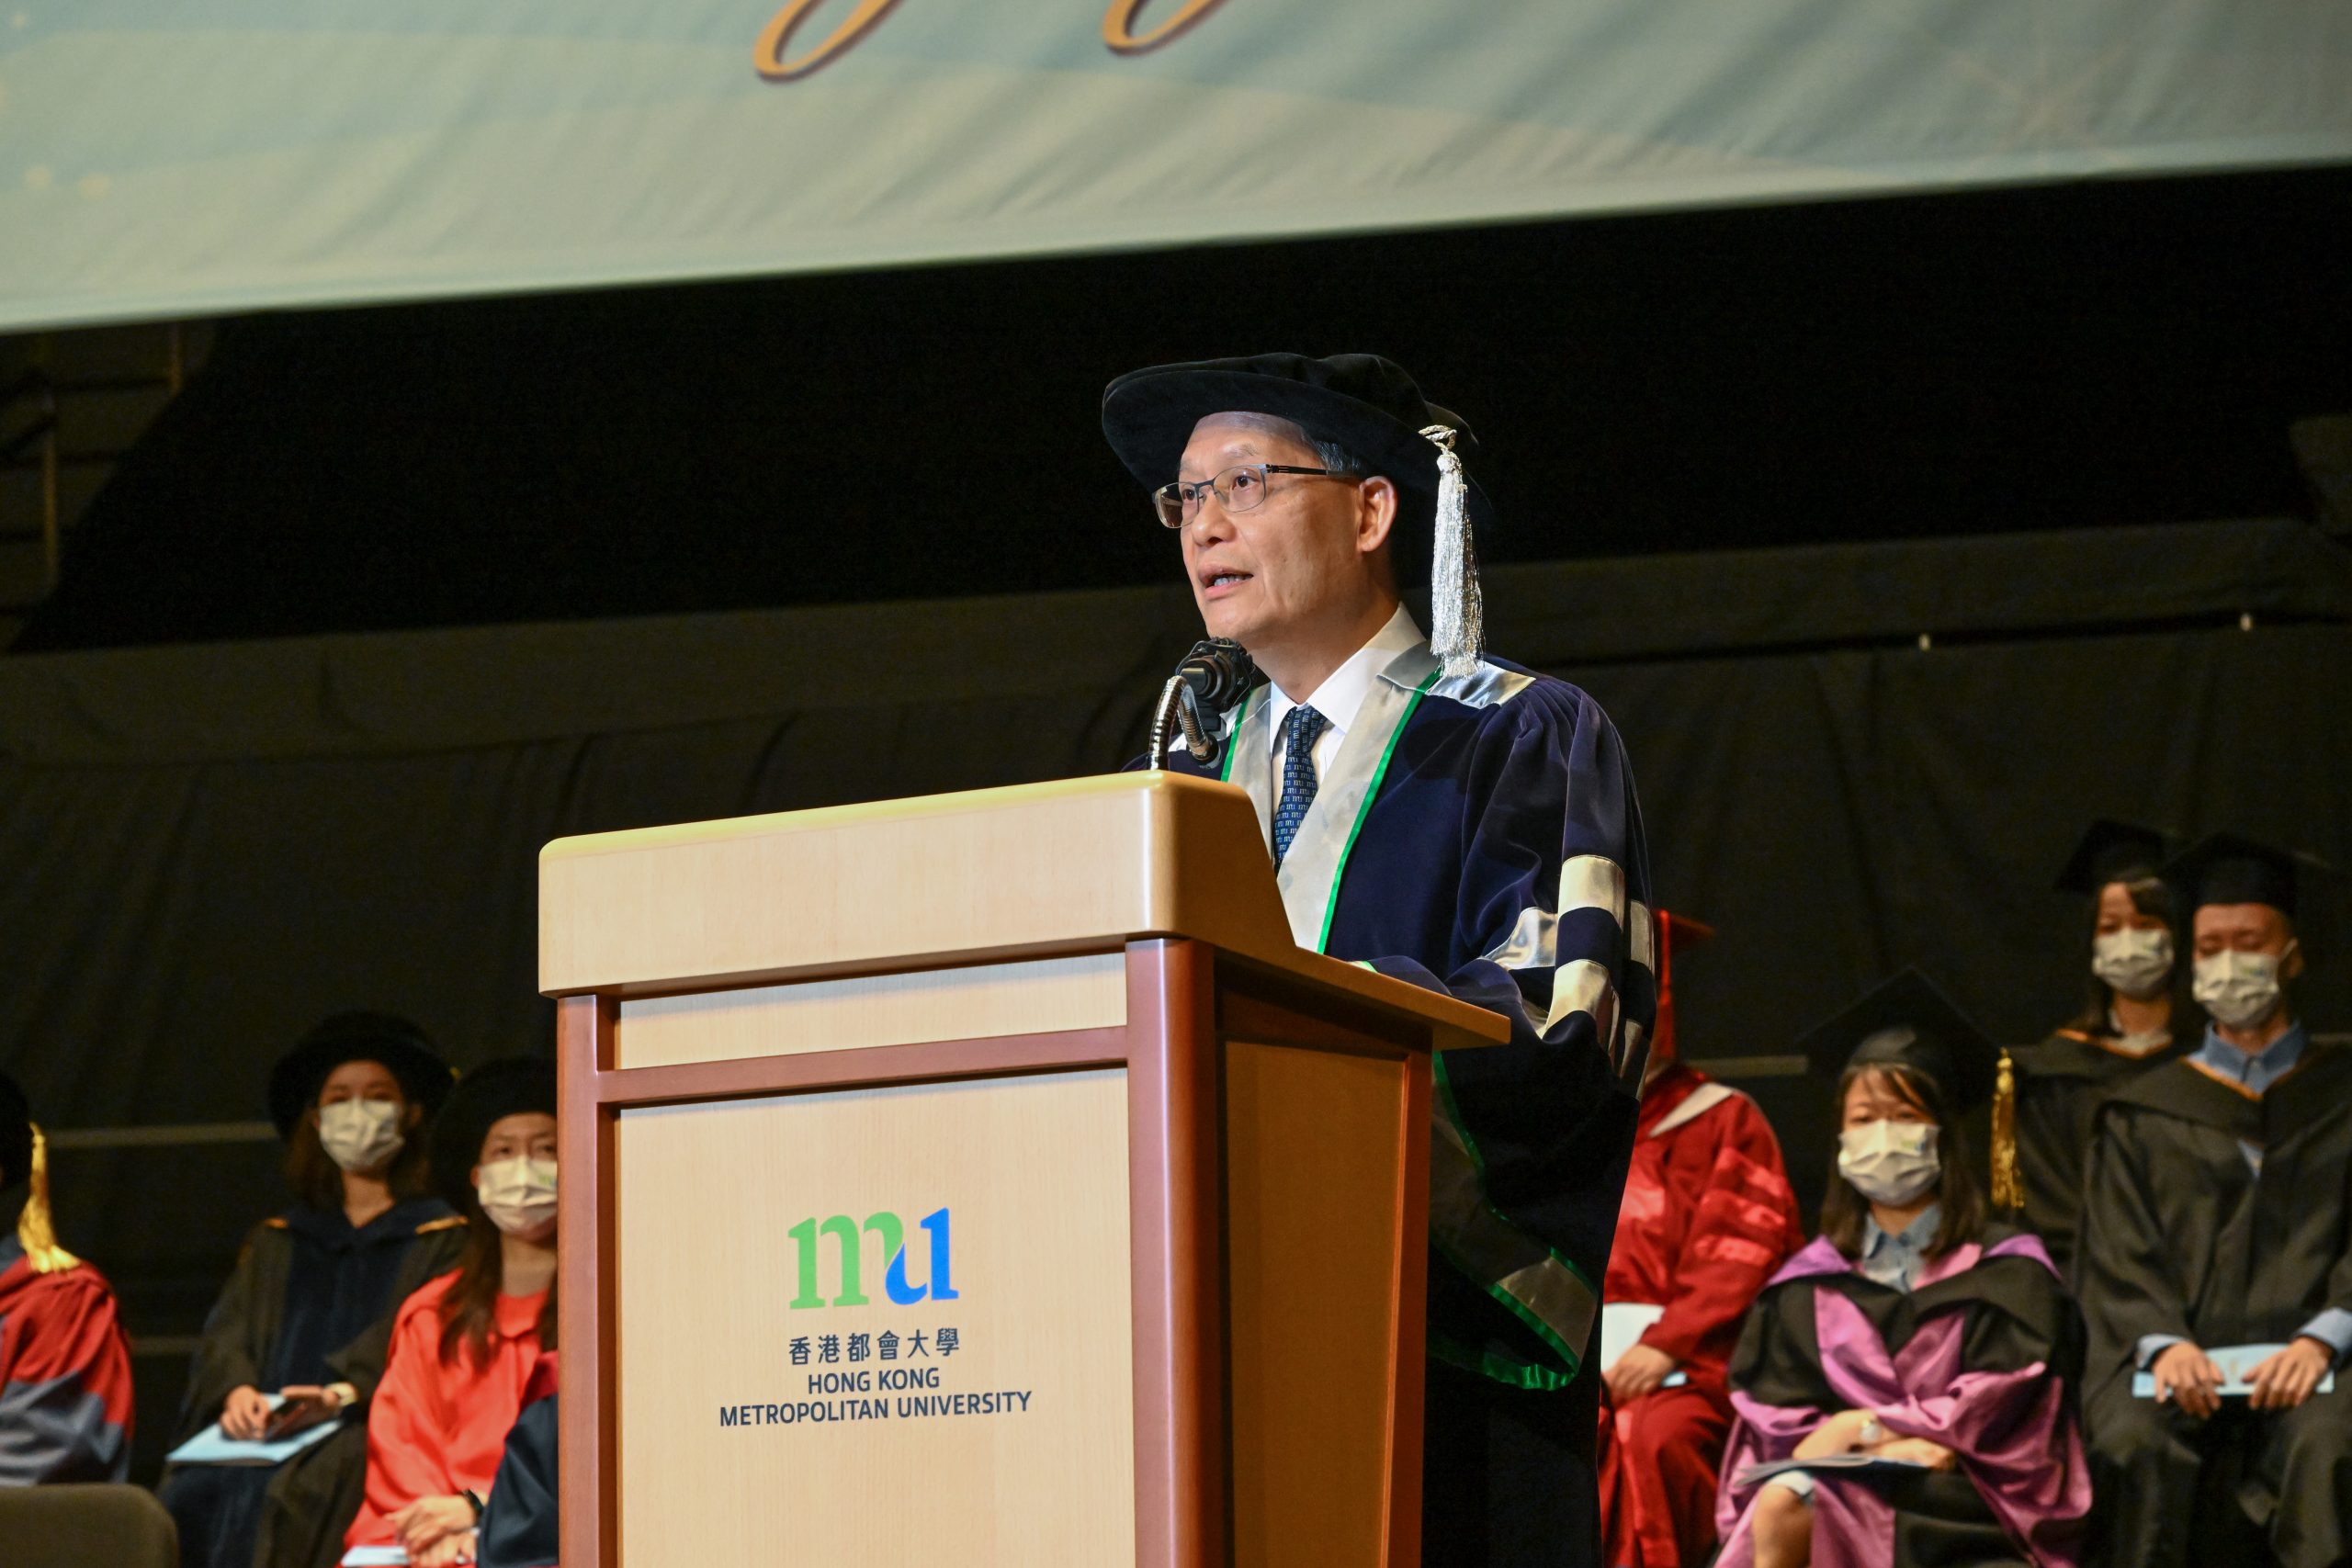 Addressing the ceremony, President Prof. Paul Lam Kwan-sing congratulates the graduates for successfully completing their studies and encourages them to pursue life-long learning to equip themselves for future challenges.